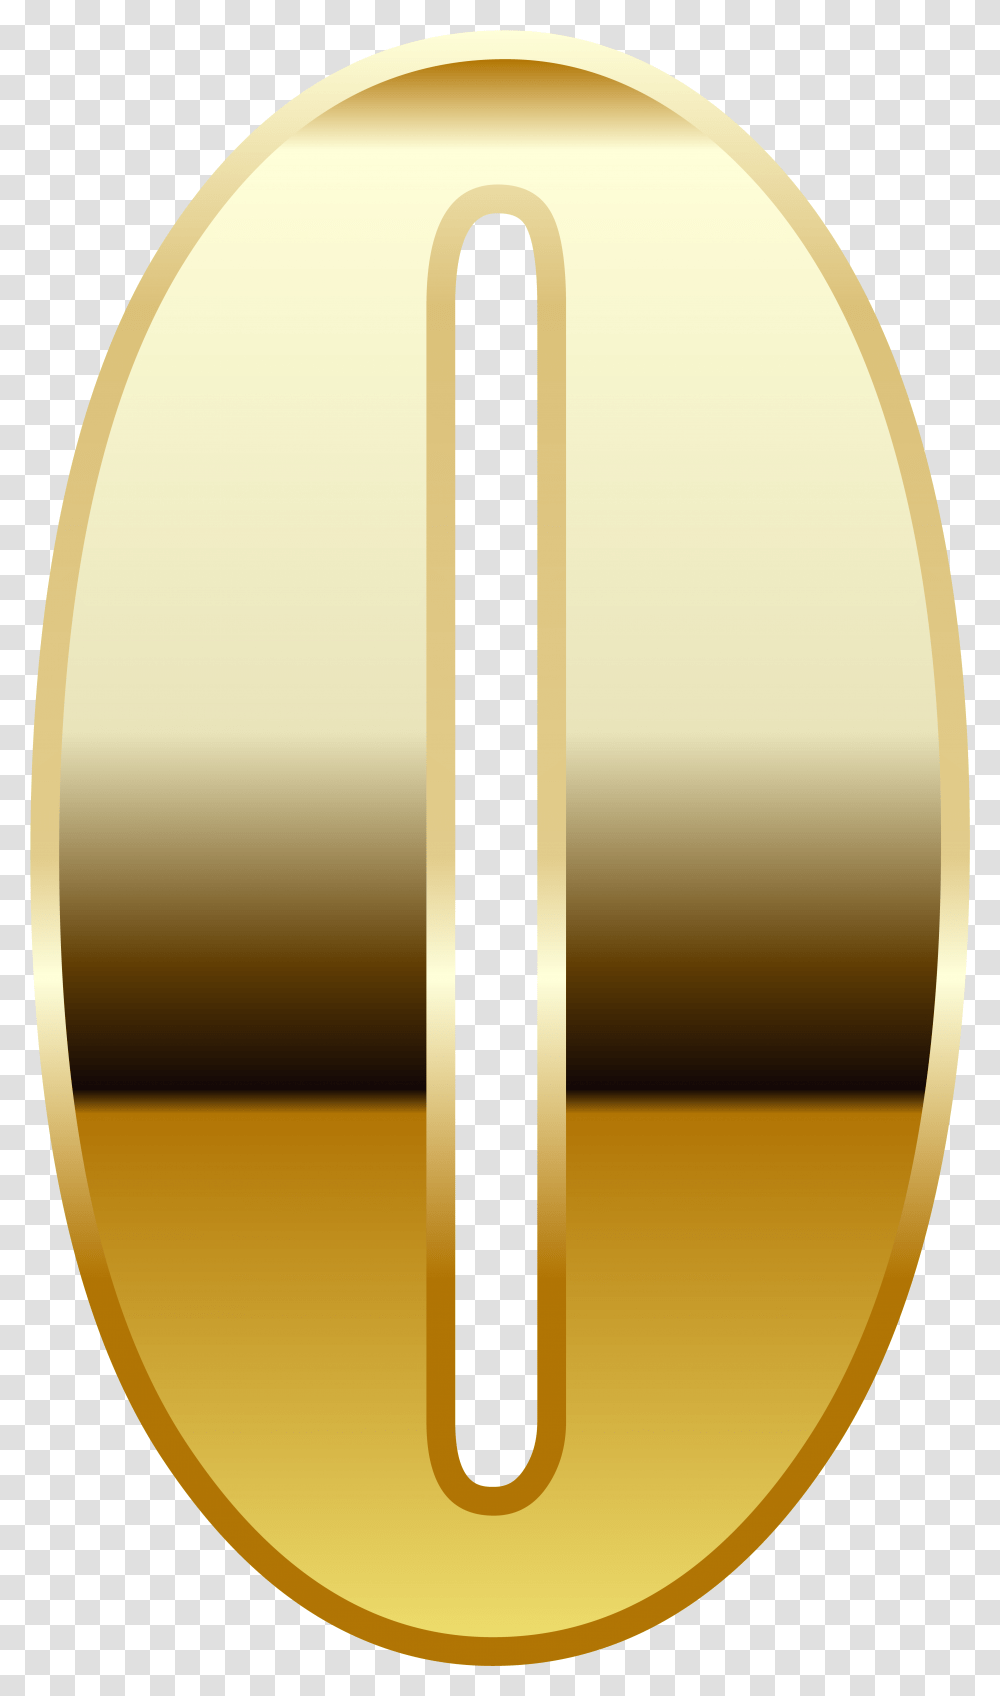 Download Hd Gold Number Zero Image Zero Gold Number, Weapon, Weaponry, Ammunition, Bar Counter Transparent Png